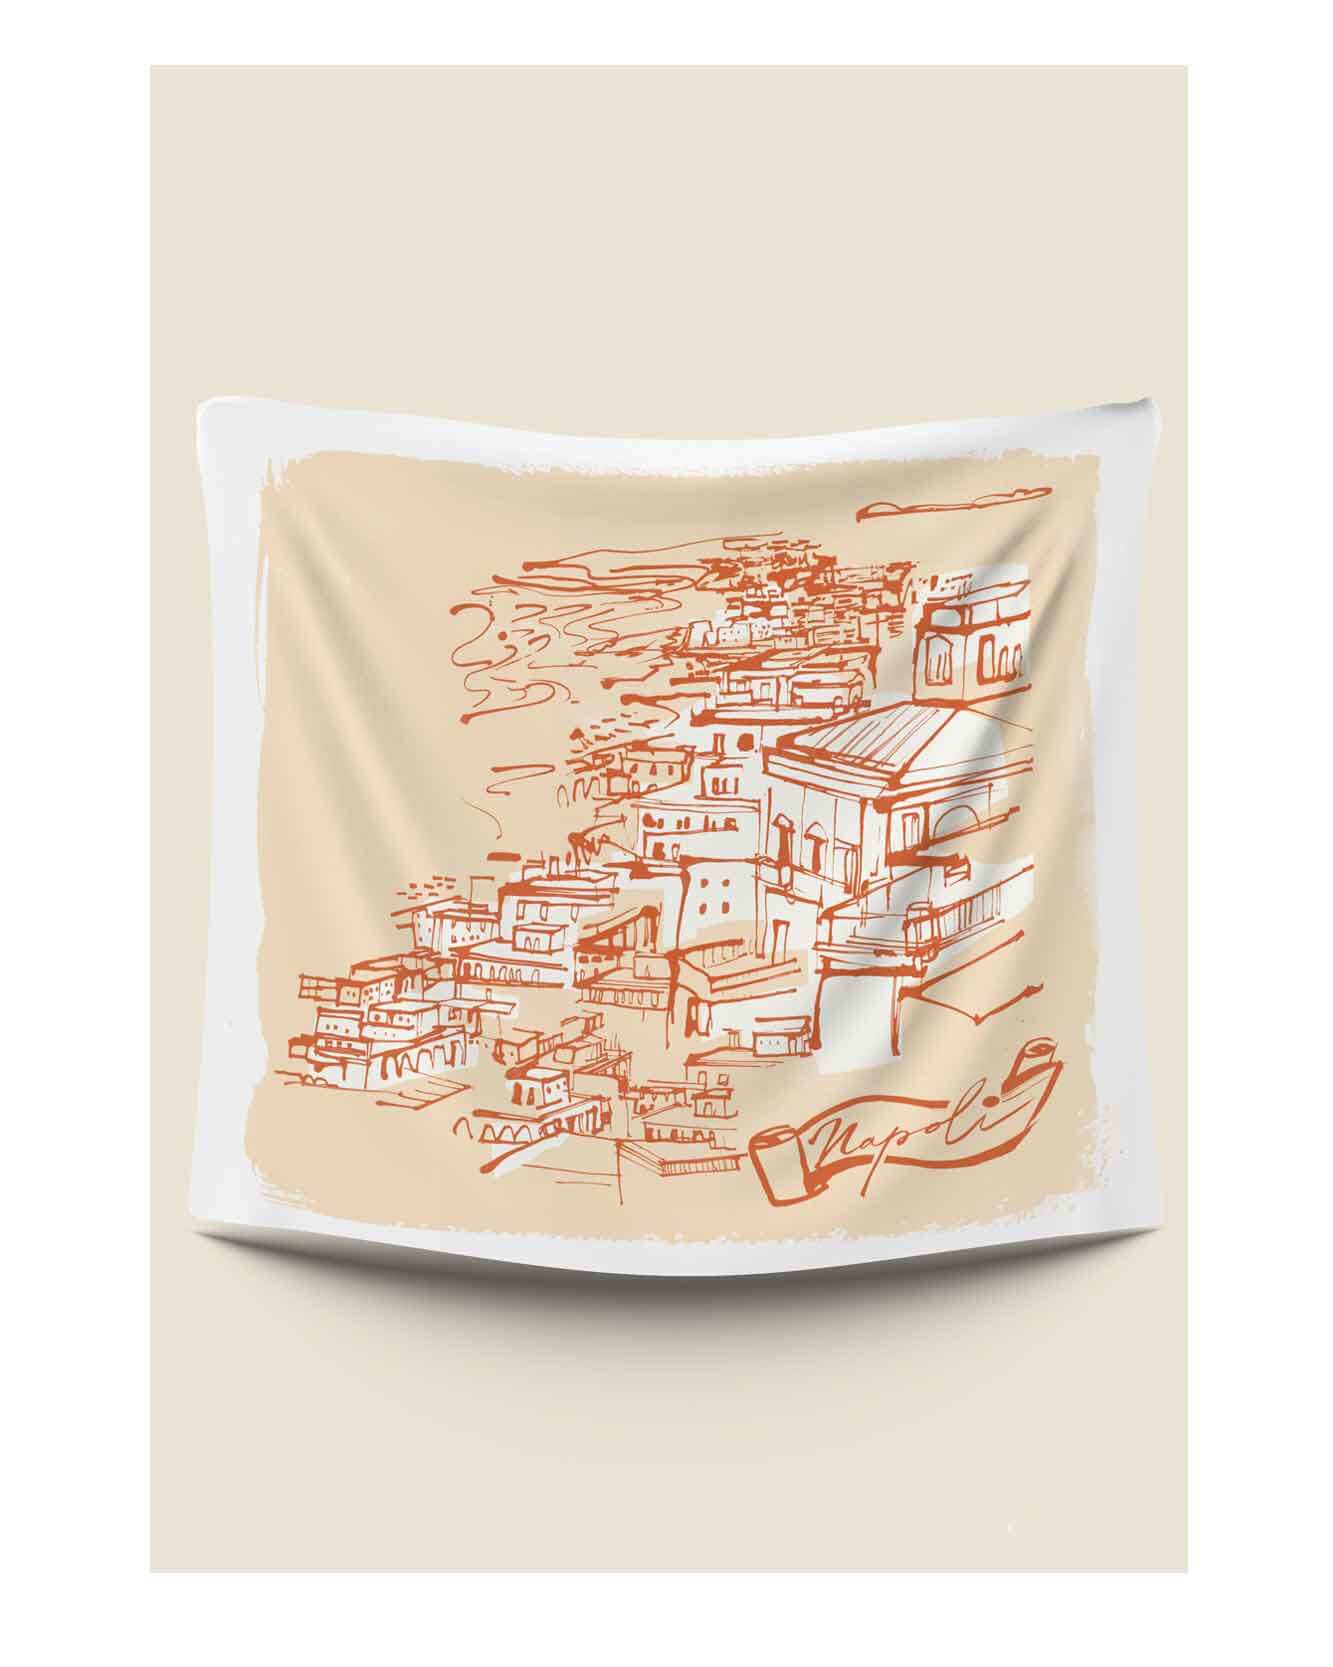 Silk scarf illustration. Inspired by Italian city of Naples for fashion brand Kitson, who's headquarters are in the ancient Italian city. Simple linear style illustration and flat colours taken from the fashion houses upcoming collections. With drawings of famous Naples landmarks and architecture.